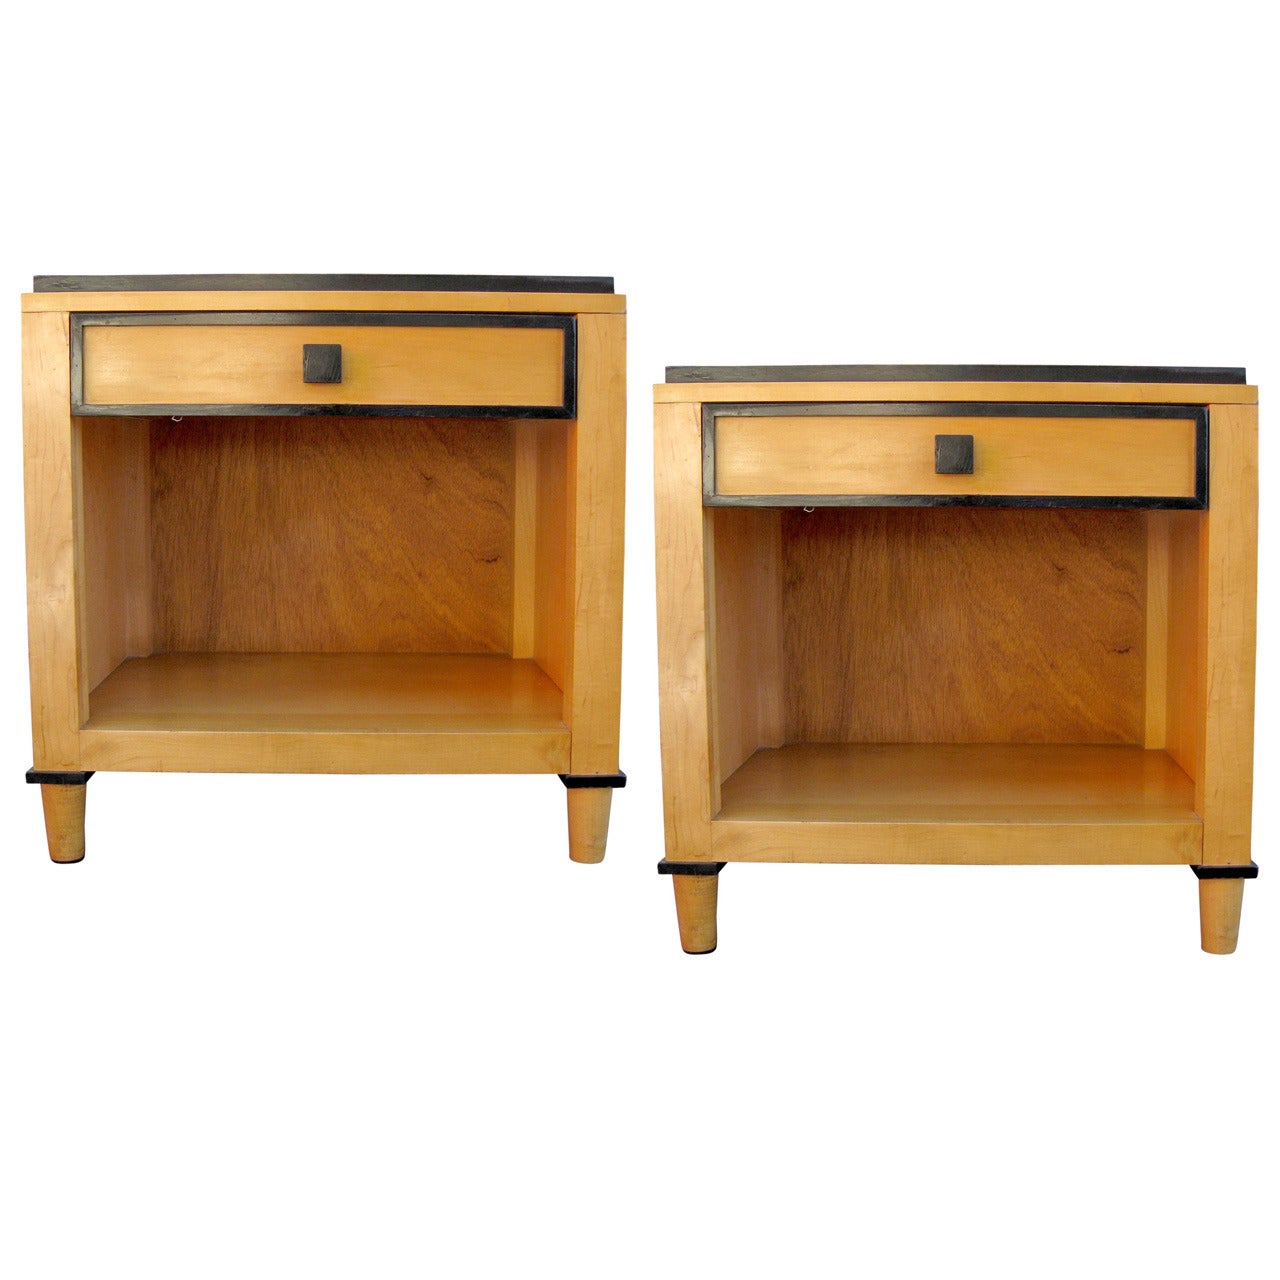 Pair of Two-Tone Wooden Side Tables by Kimball Hospitality